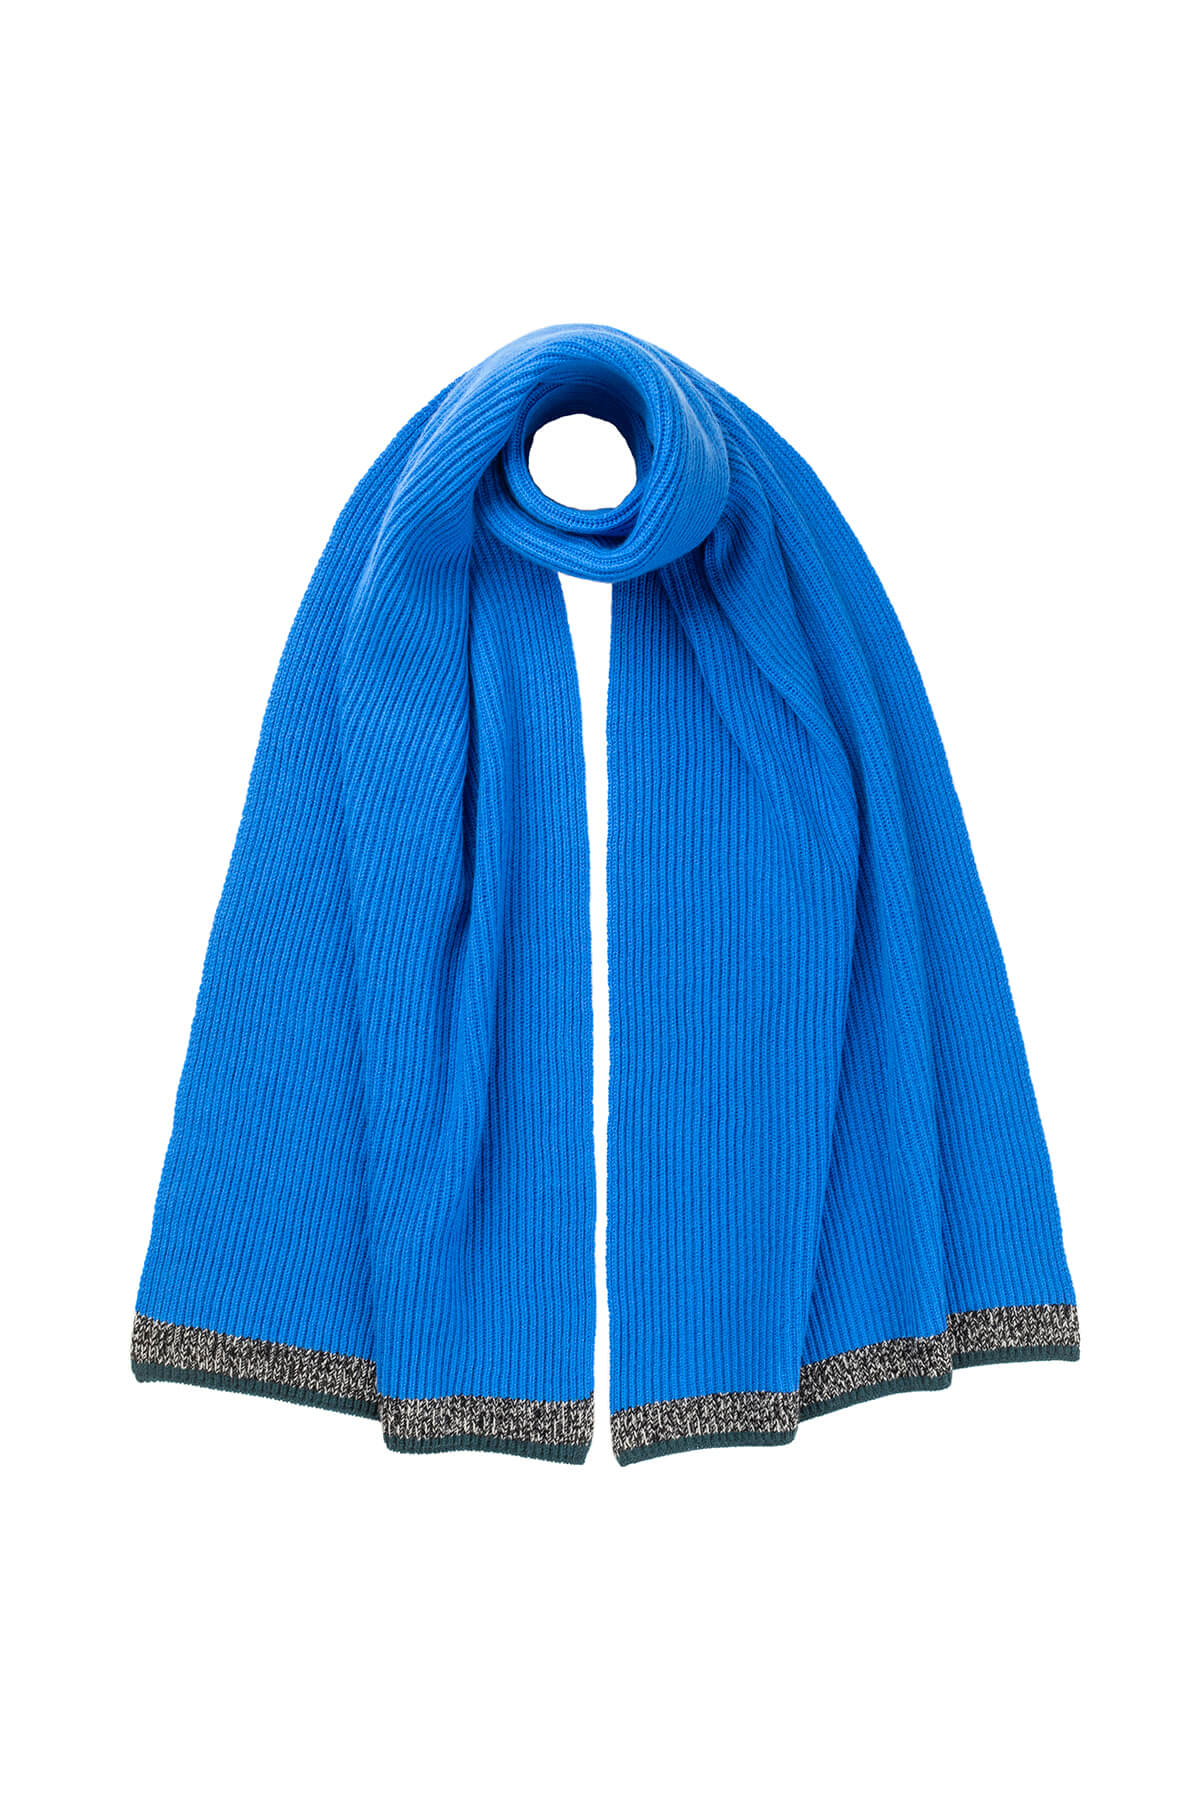 Johnstons of Elgin’s Orkney Blue Ribbed Cashmere Tipping Scarf on a white background HAA03306Q23684